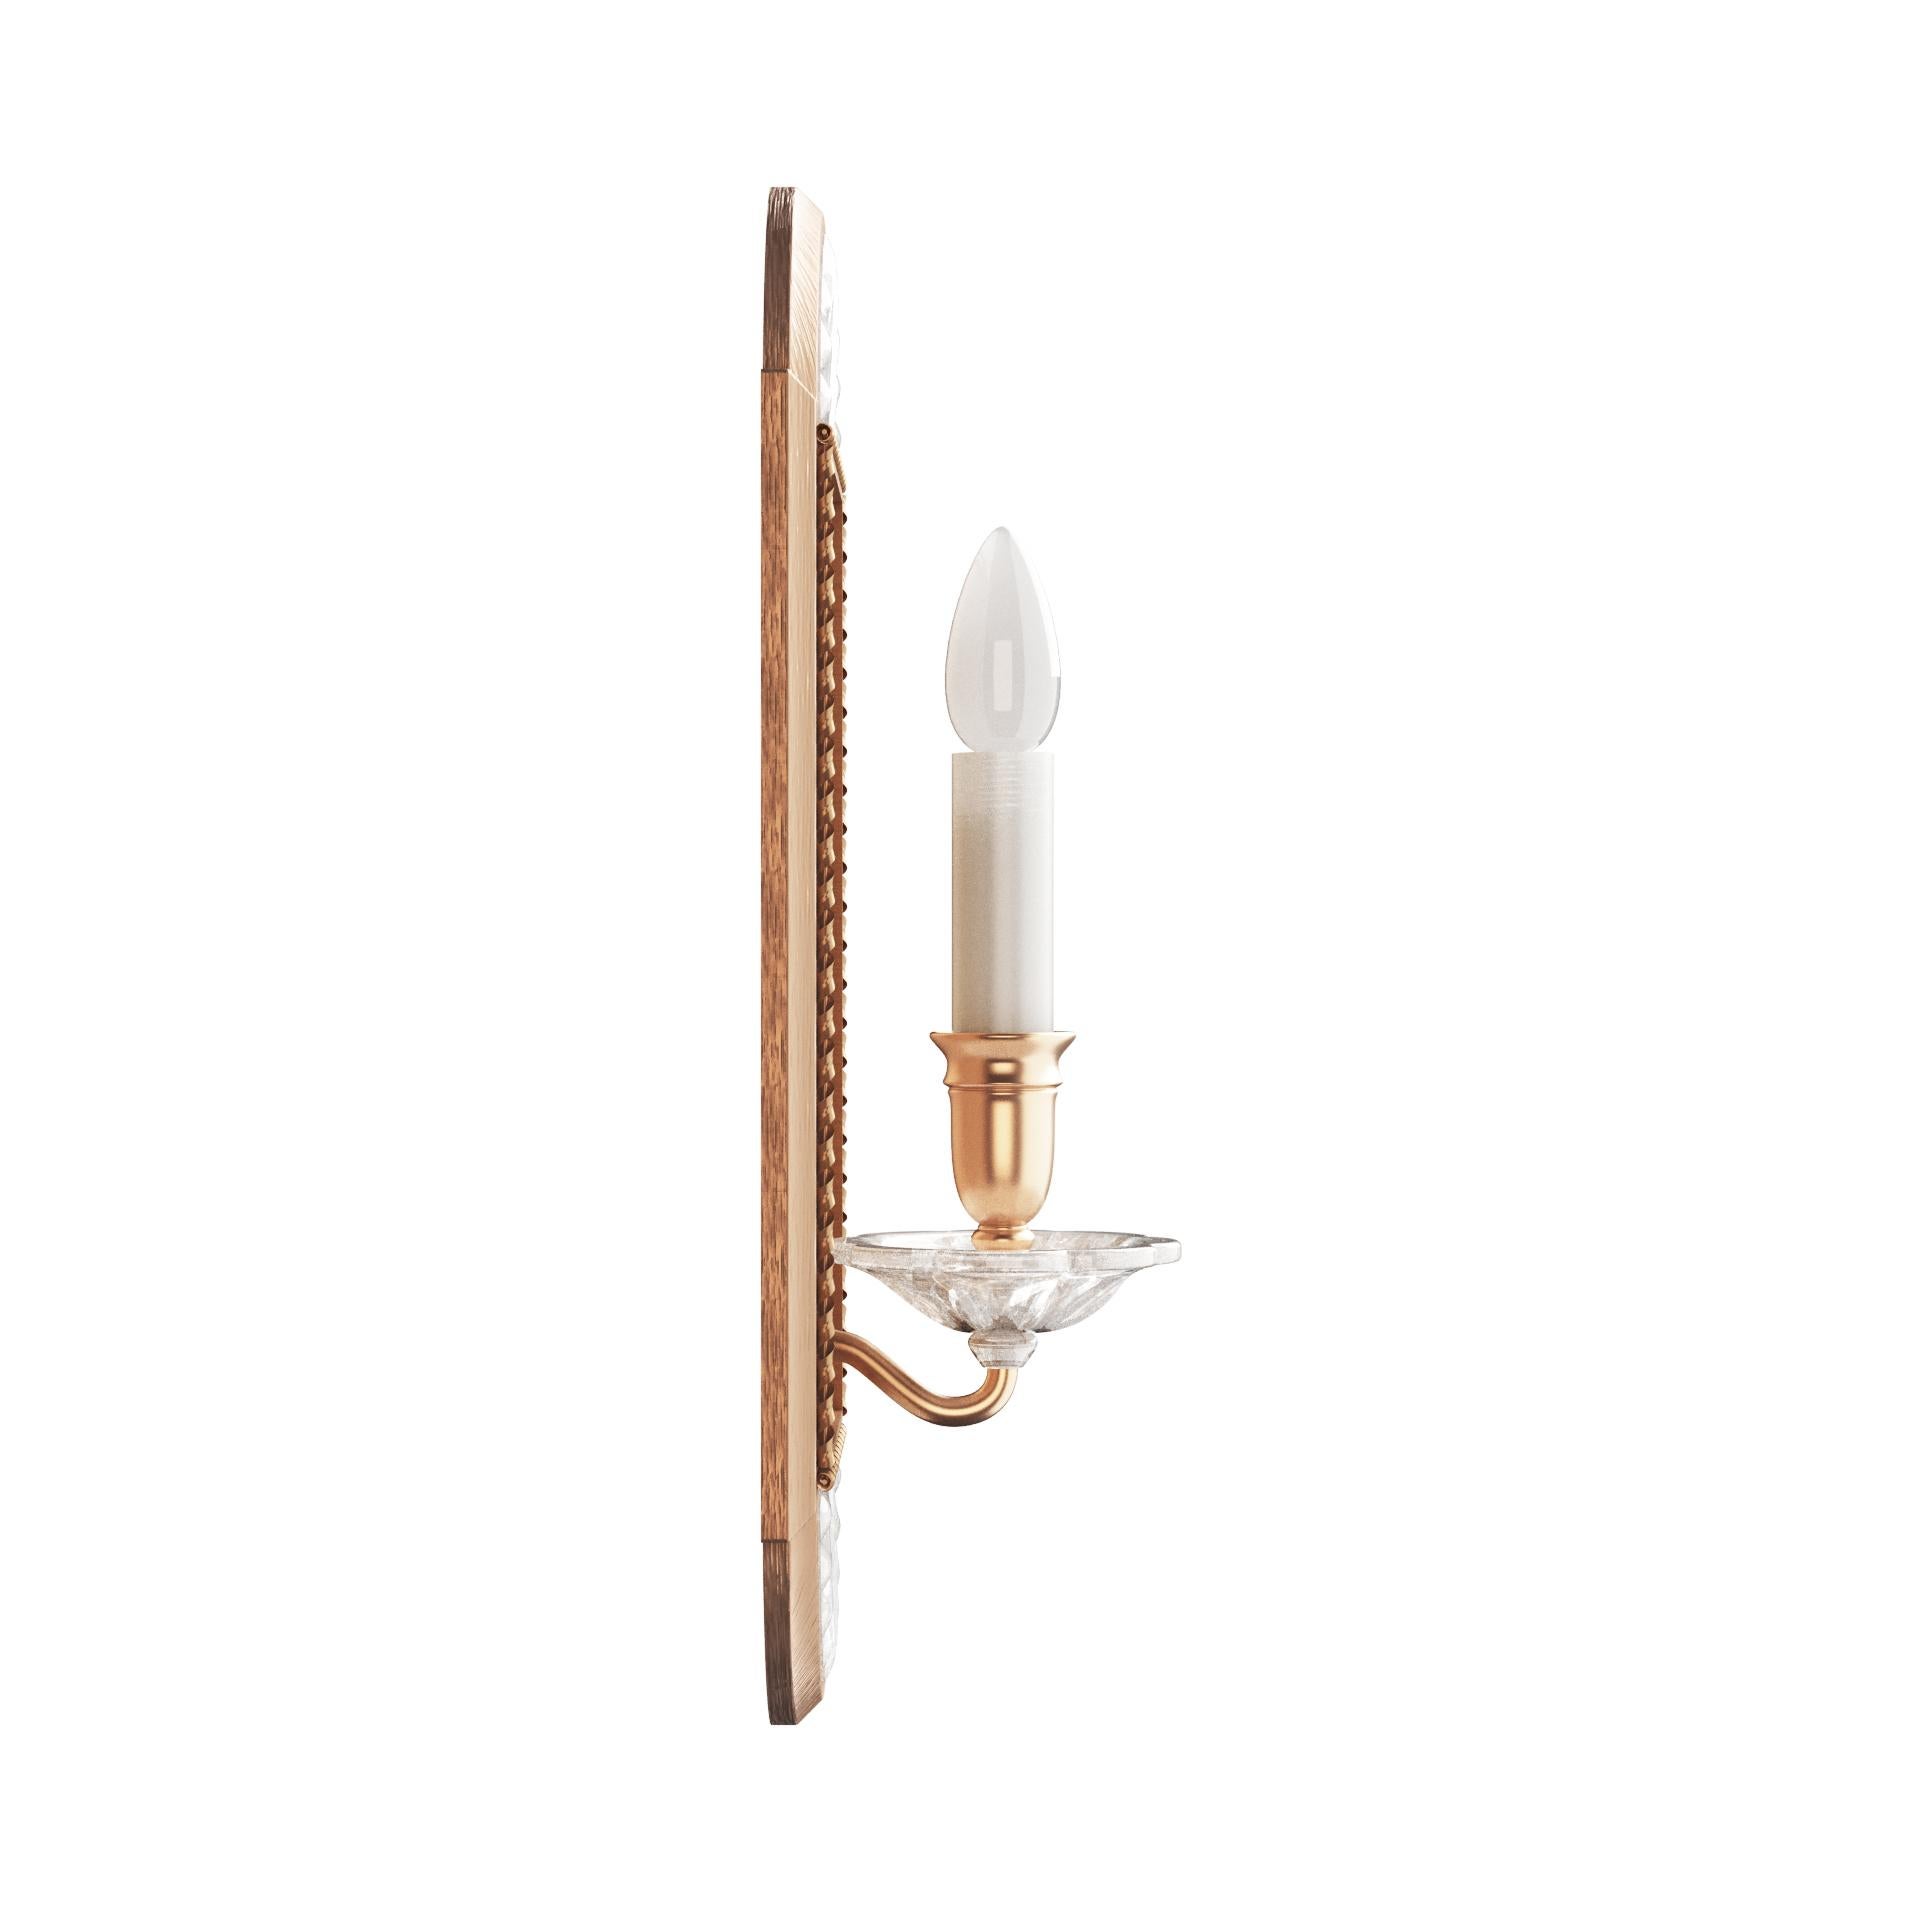 A pair of brass single-light sconces with carved rock crystal bobeches and shell motifs. Candle arms emerge from oval shaped backplates with decorative trim. Also available with cylindrical glass covers. Made by David Duncan Studio in New York